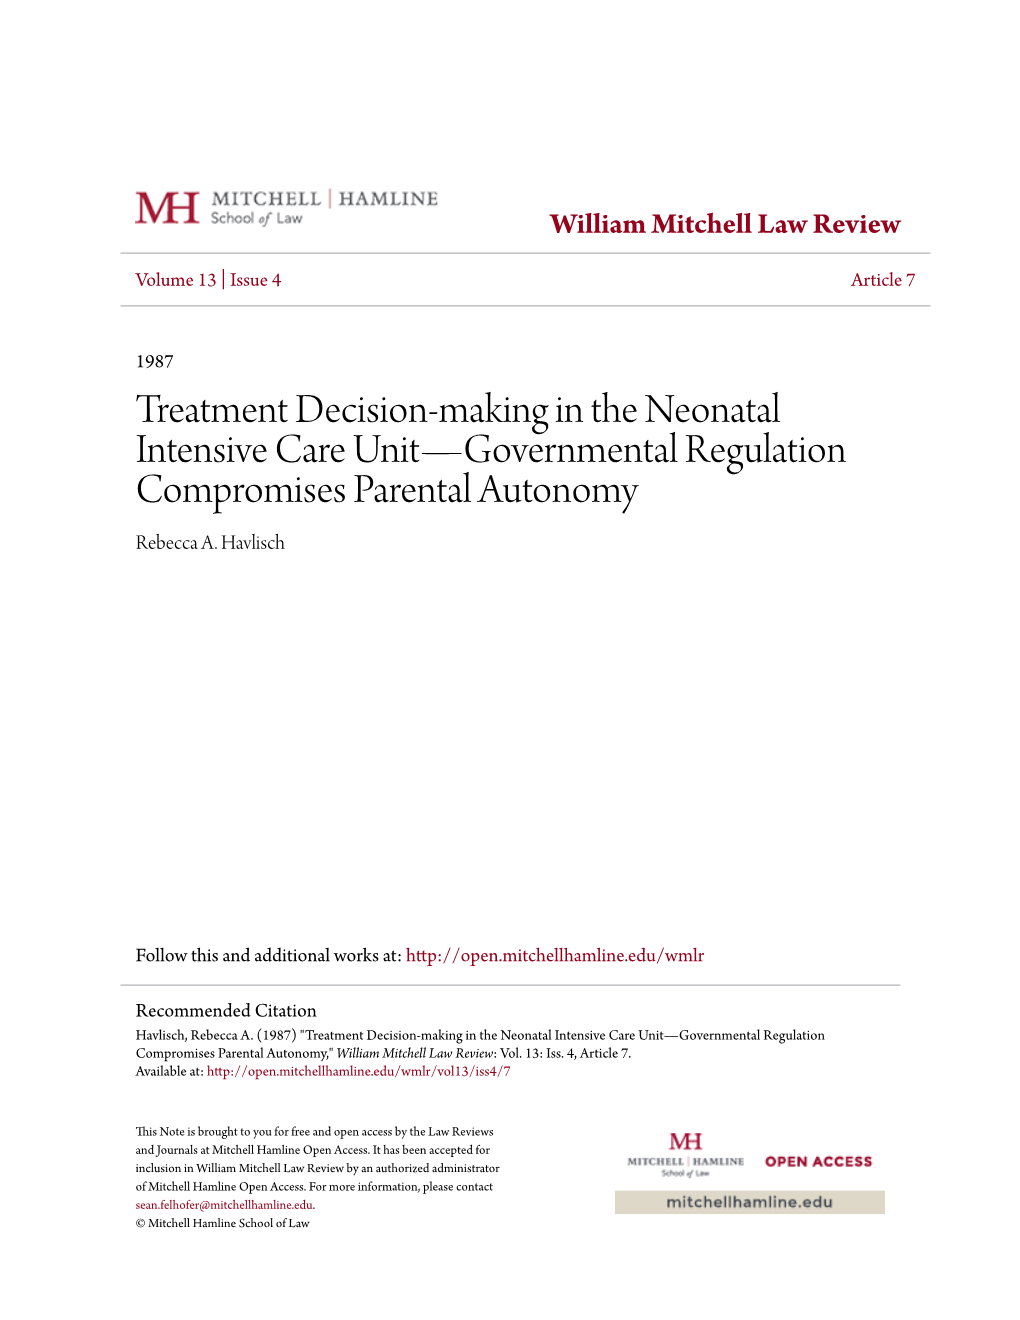 Treatment Decision-Making in the Neonatal Intensive Care Unit—Governmental Regulation Compromises Parental Autonomy Rebecca A